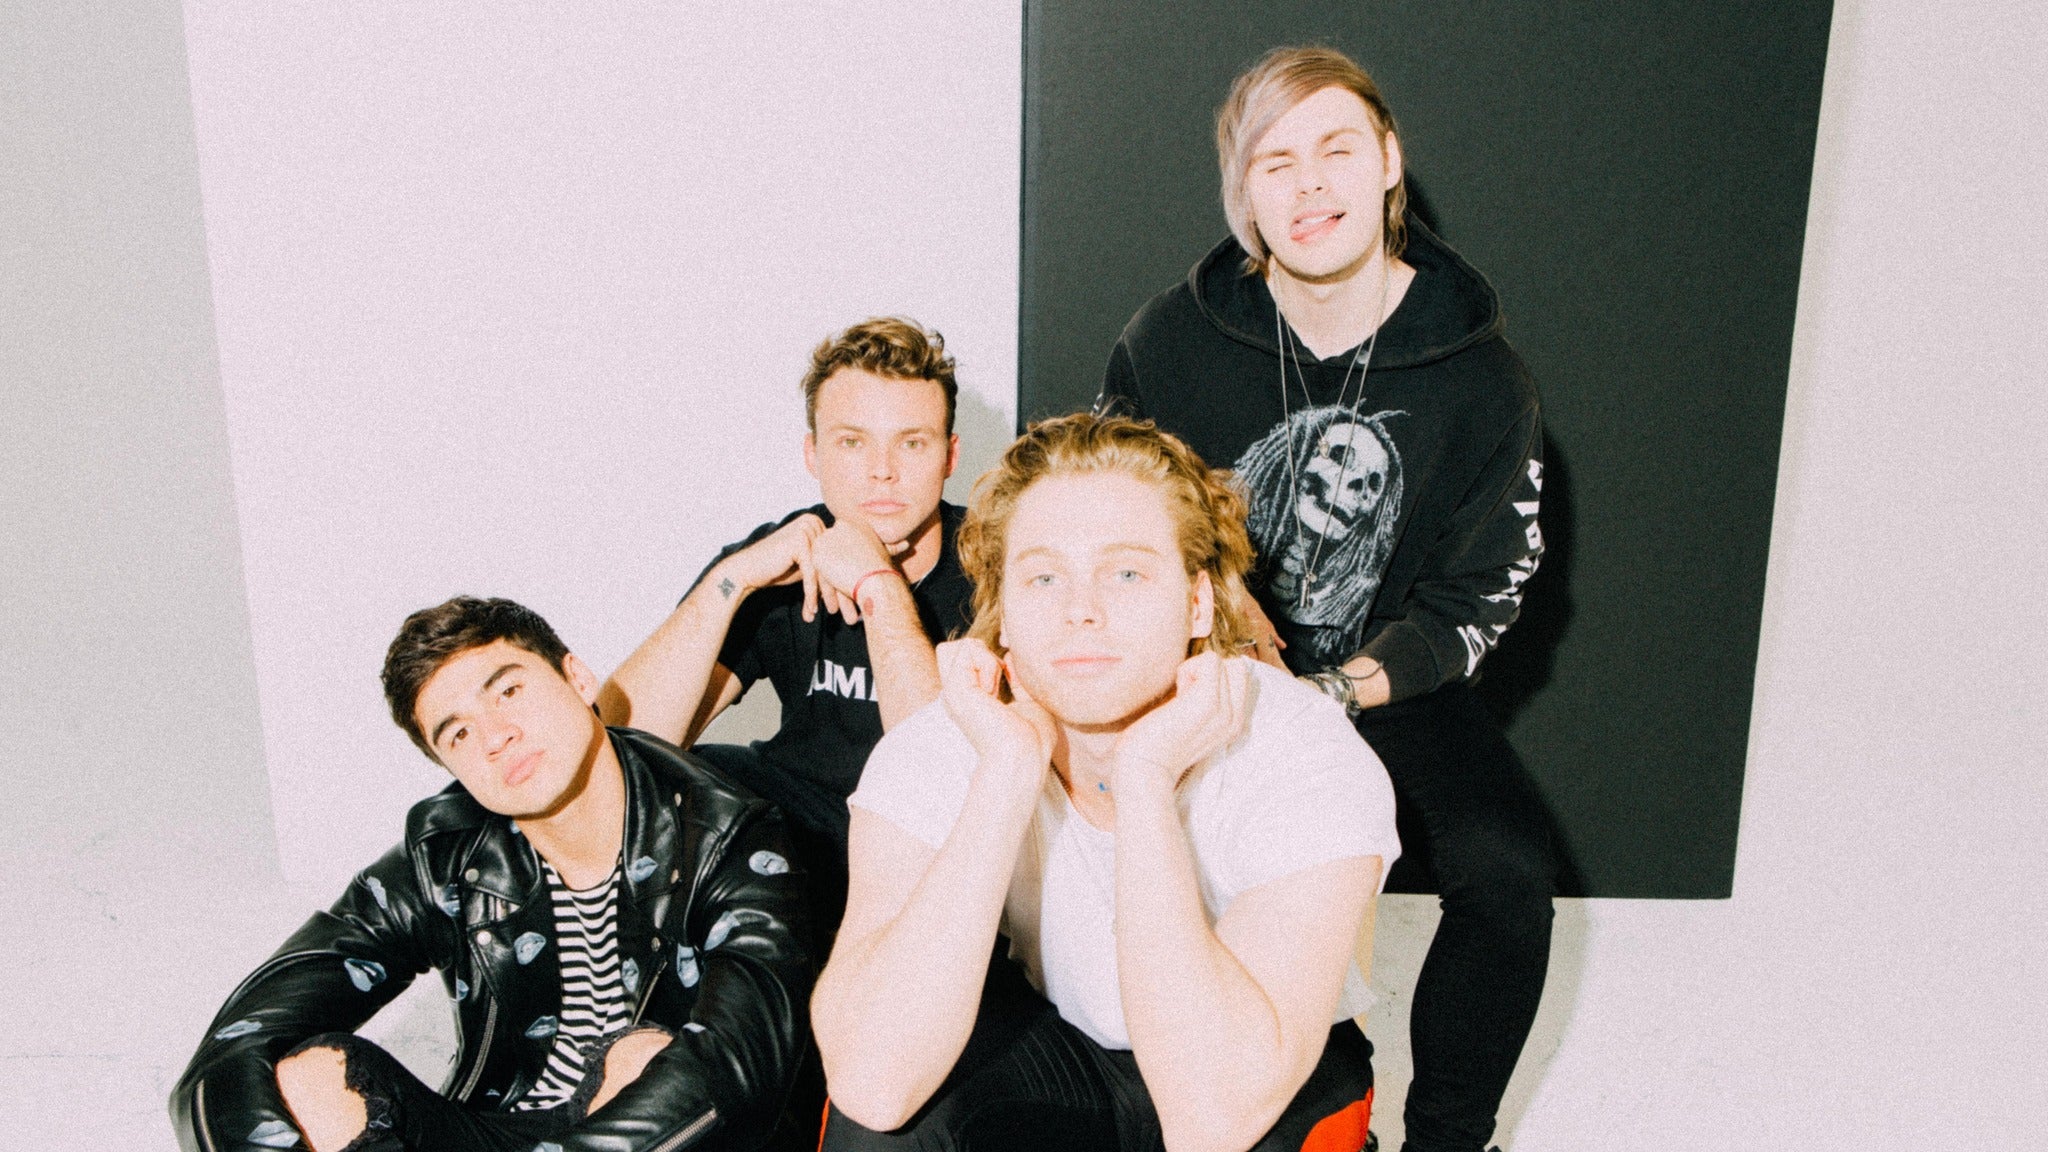 5 Seconds of Summer: Meet You There Tour in Holmdel promo photo for Citi' Cardmember Pavilion Deck Ticket presale offer code